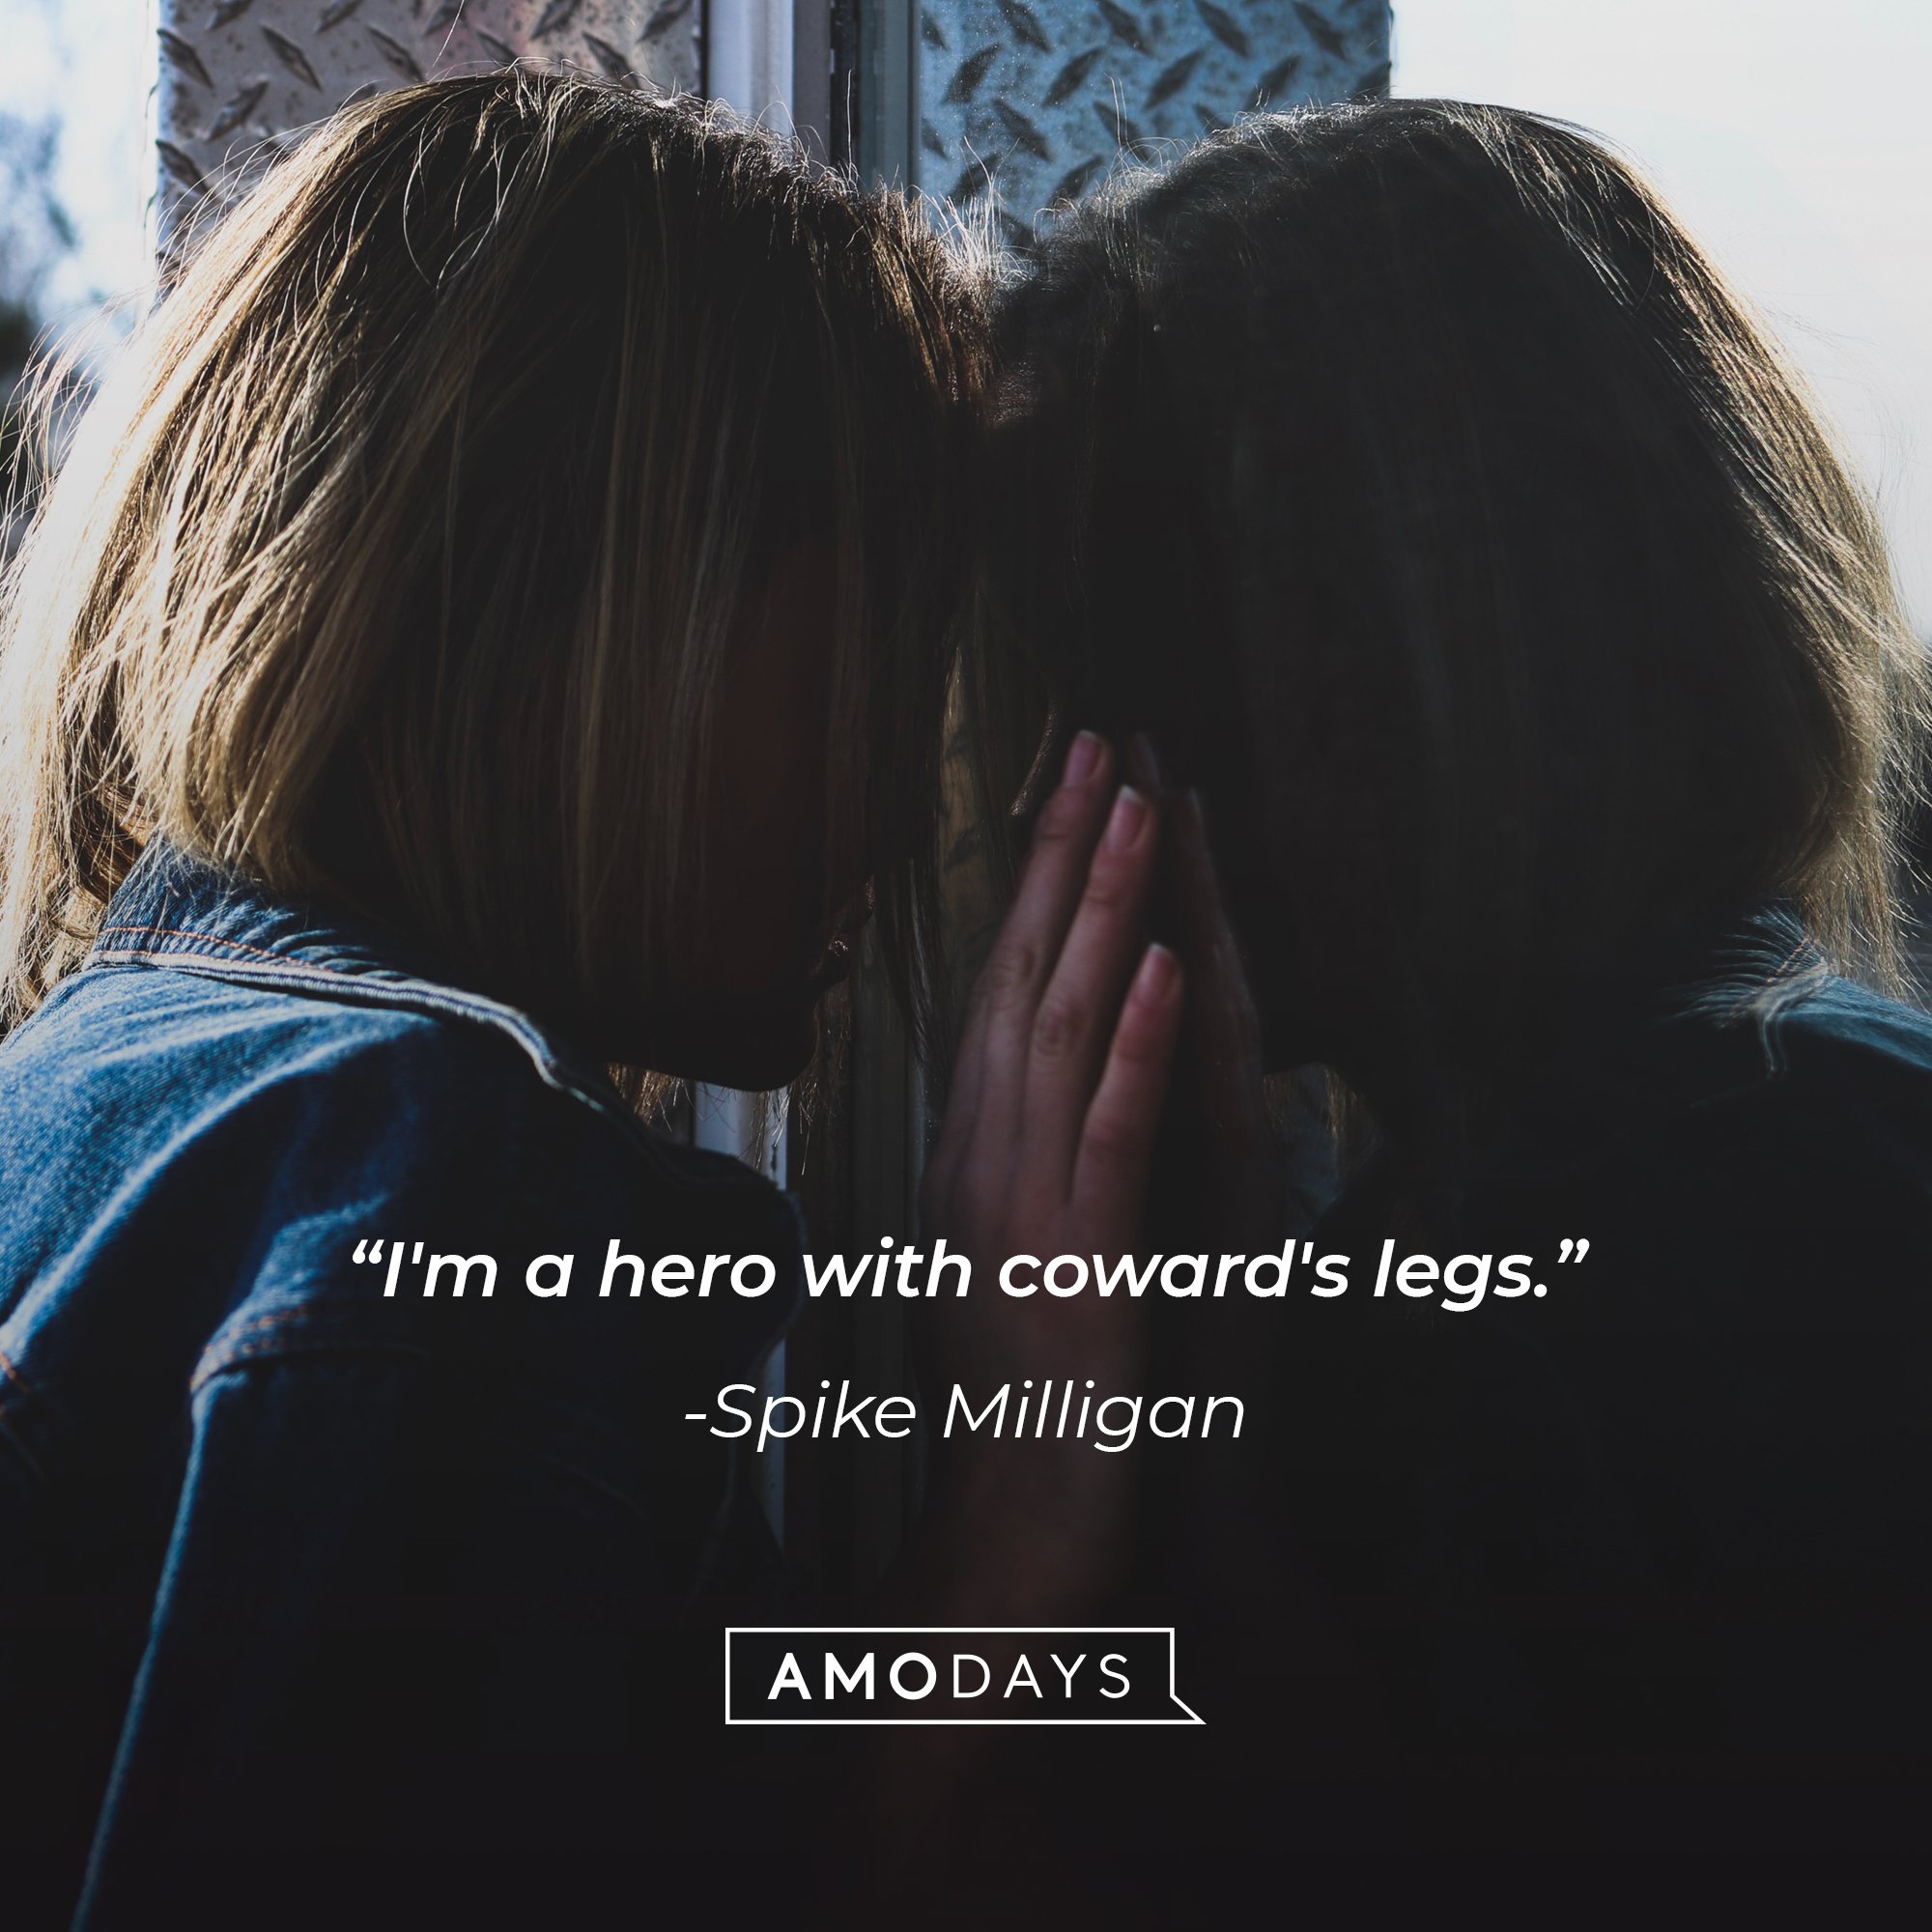 Spike Milligan’s quote: "I'm a hero with coward's legs."  | Image: AmoDays